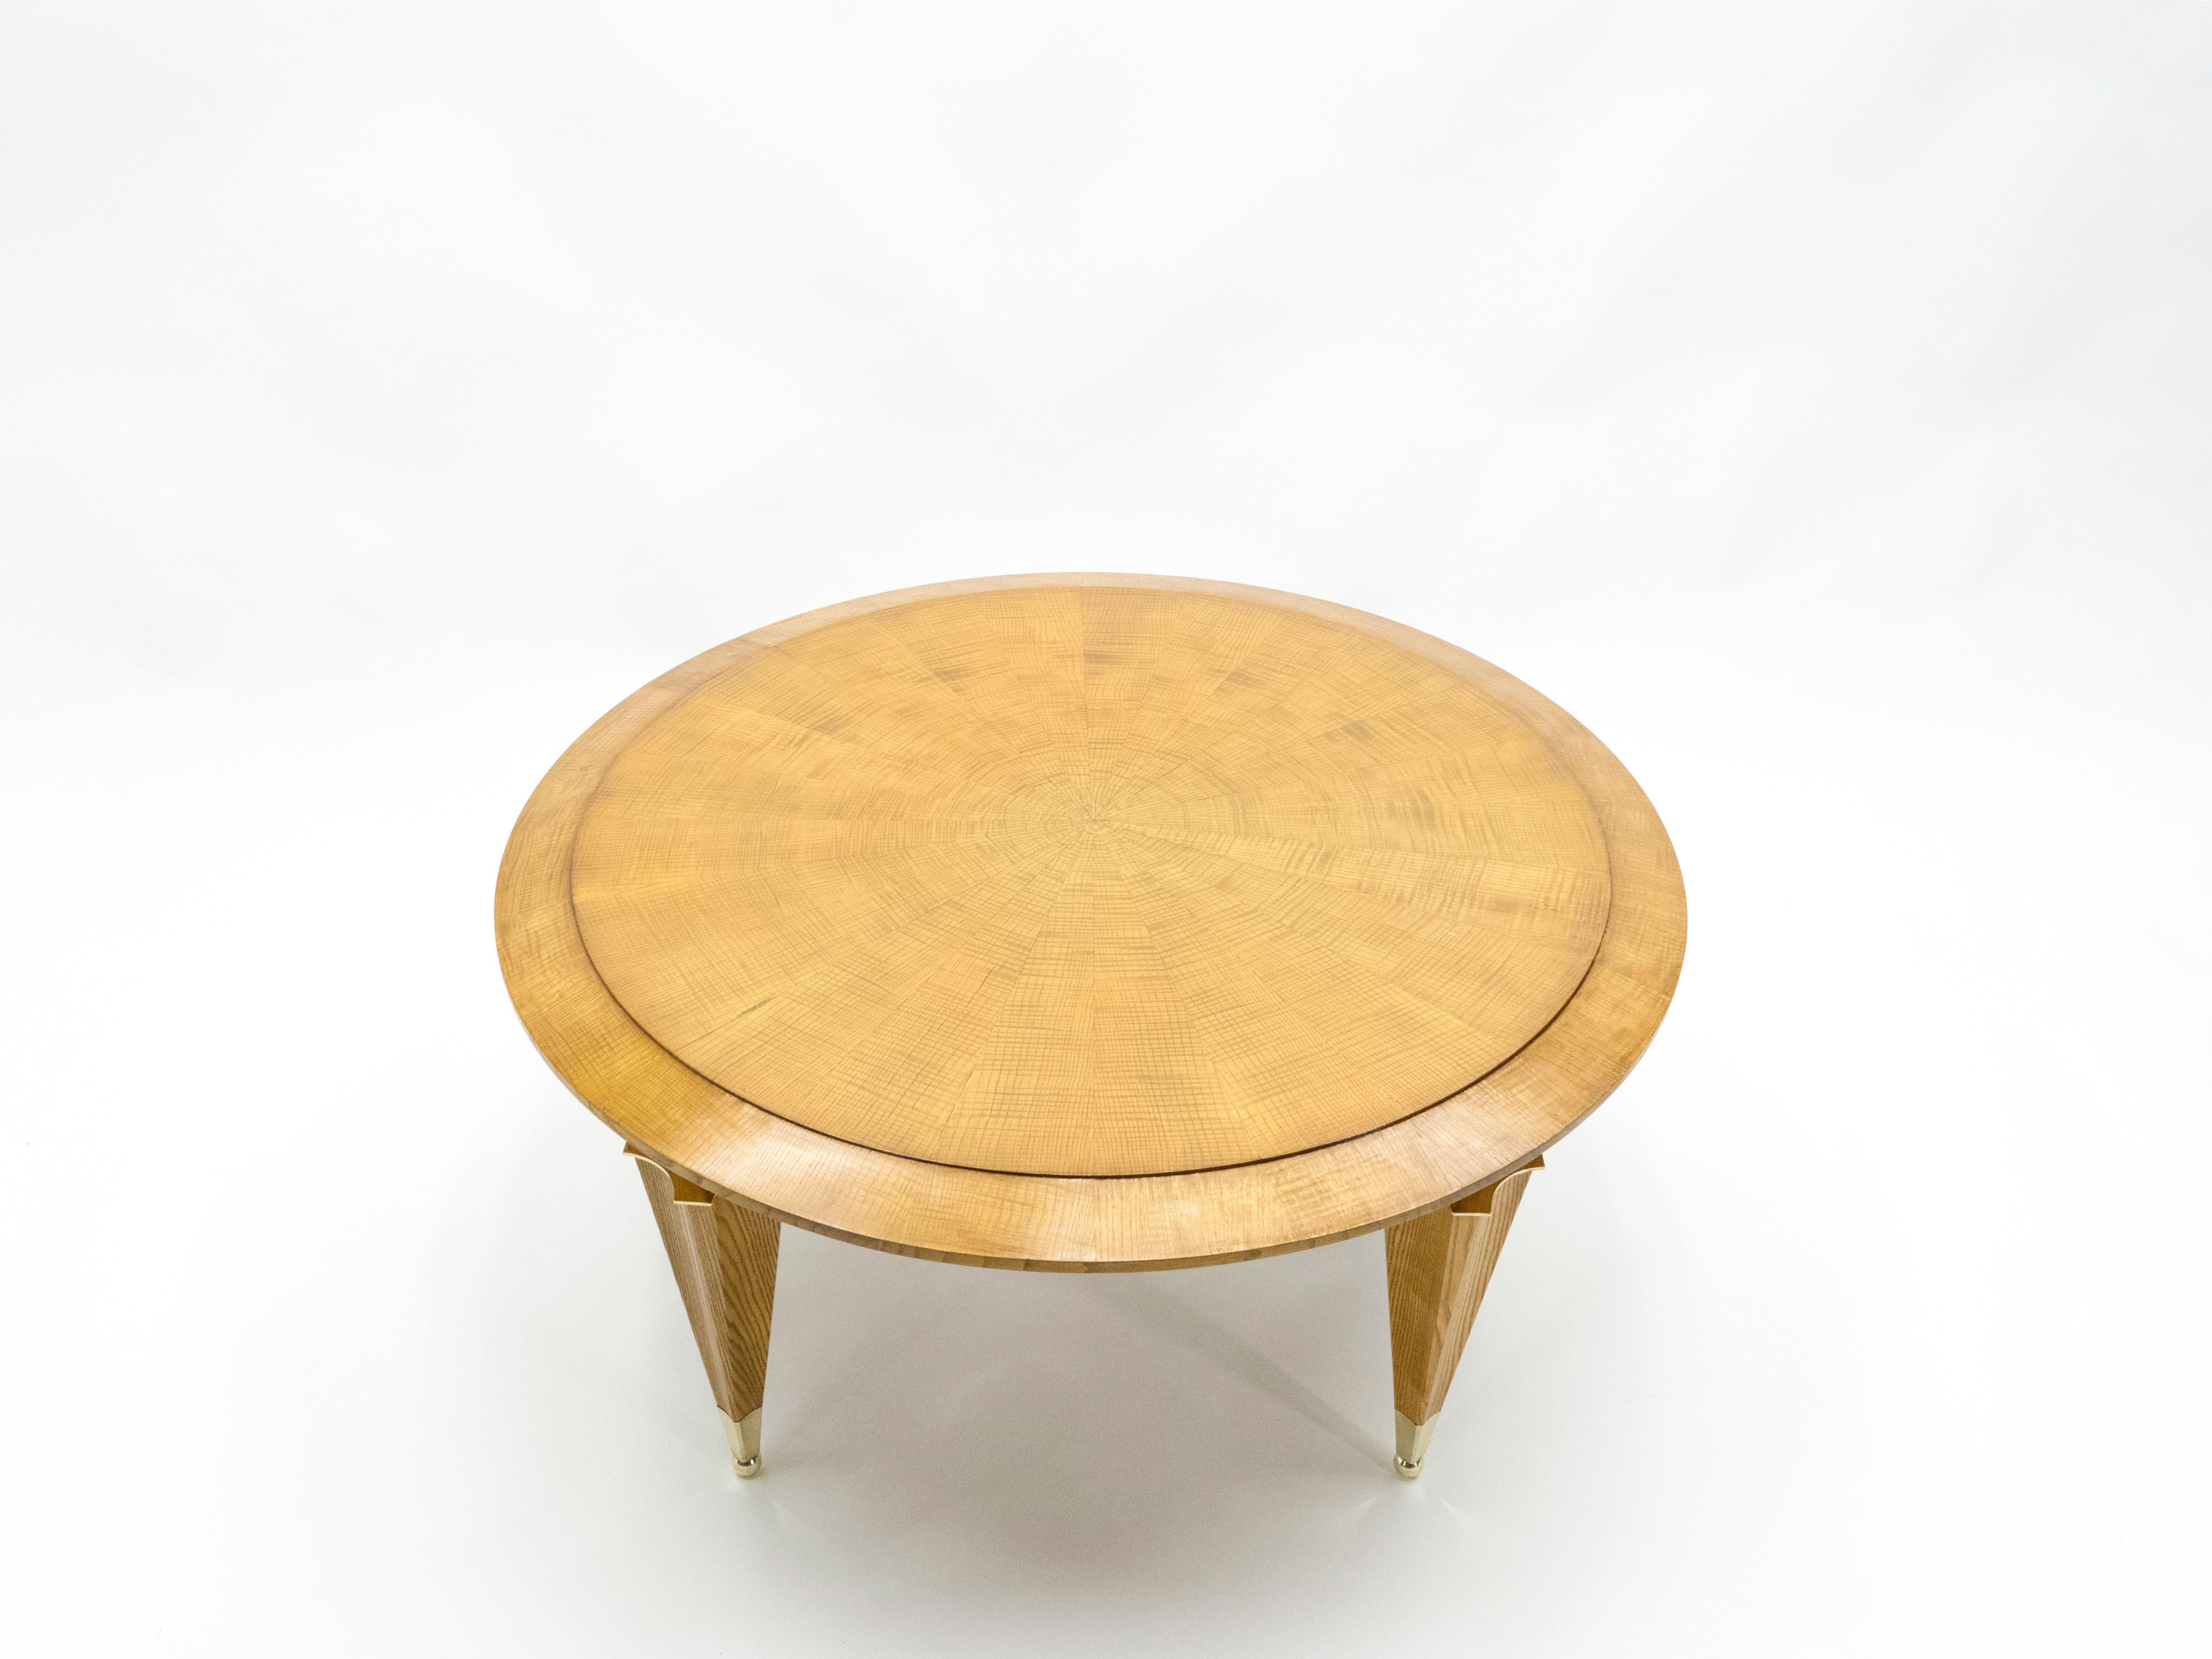 French André Arbus Ash Wood Neoclassical Coffee Table 1940s For Sale